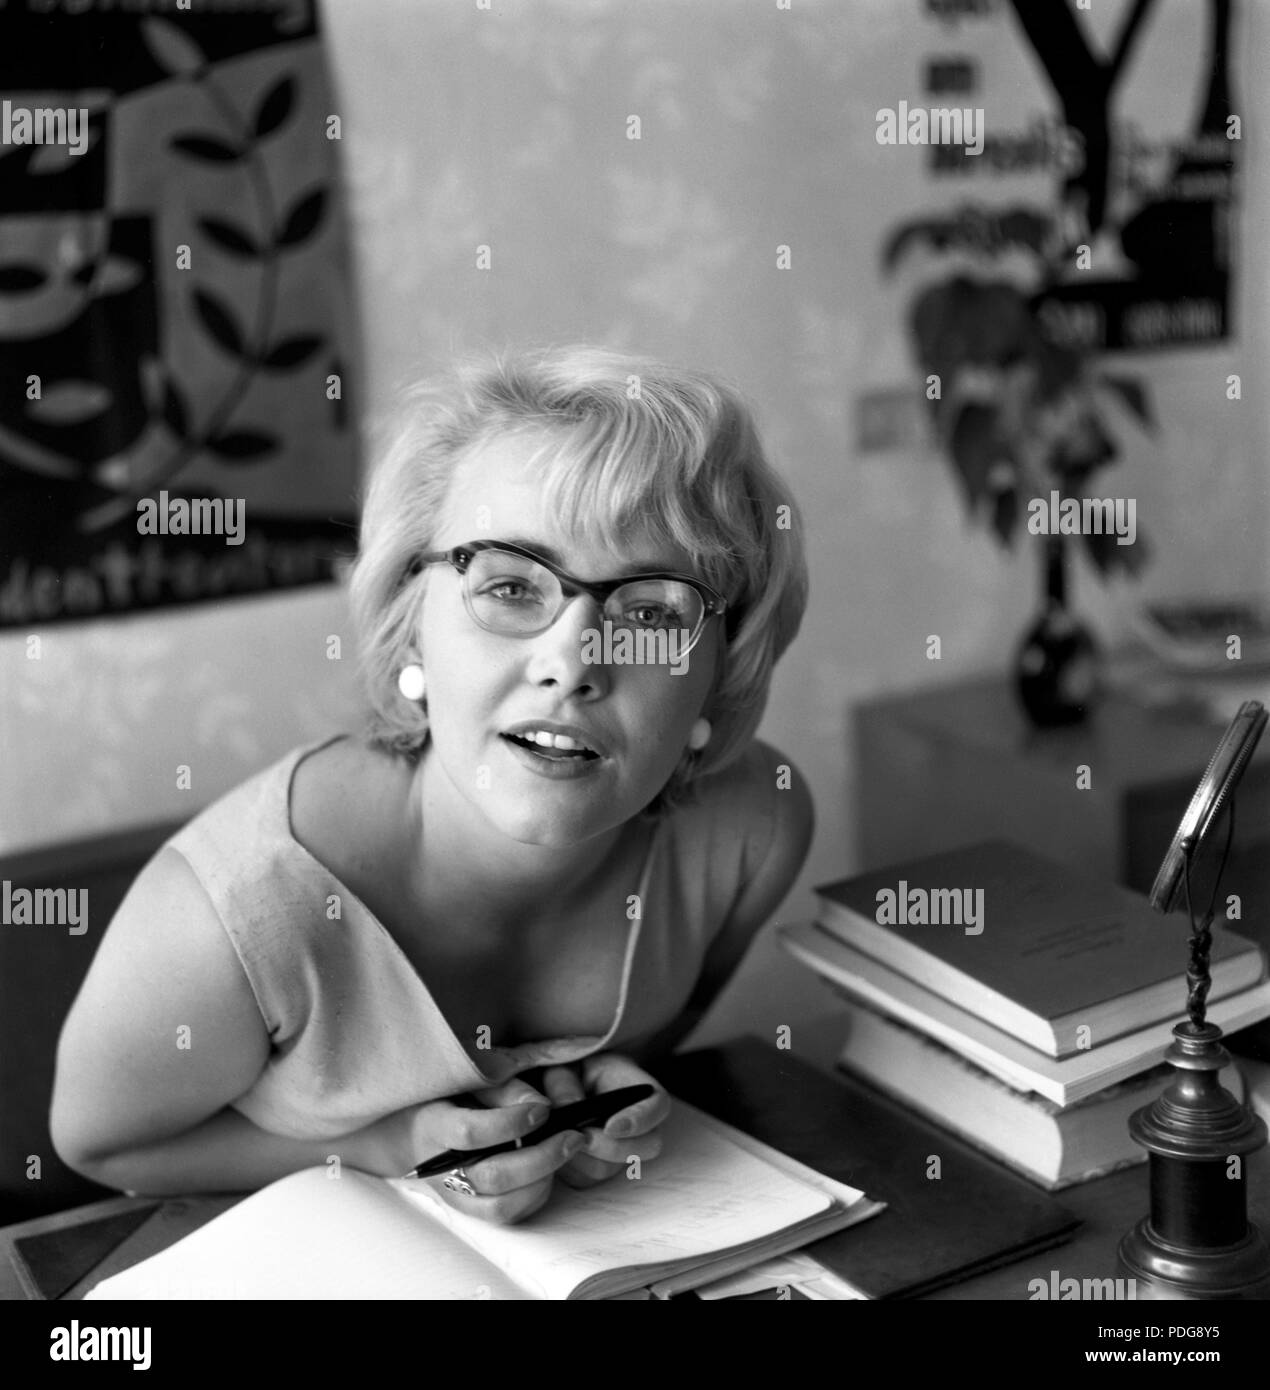 50s woman glasses Black and White Stock Photos & Images - Alamy